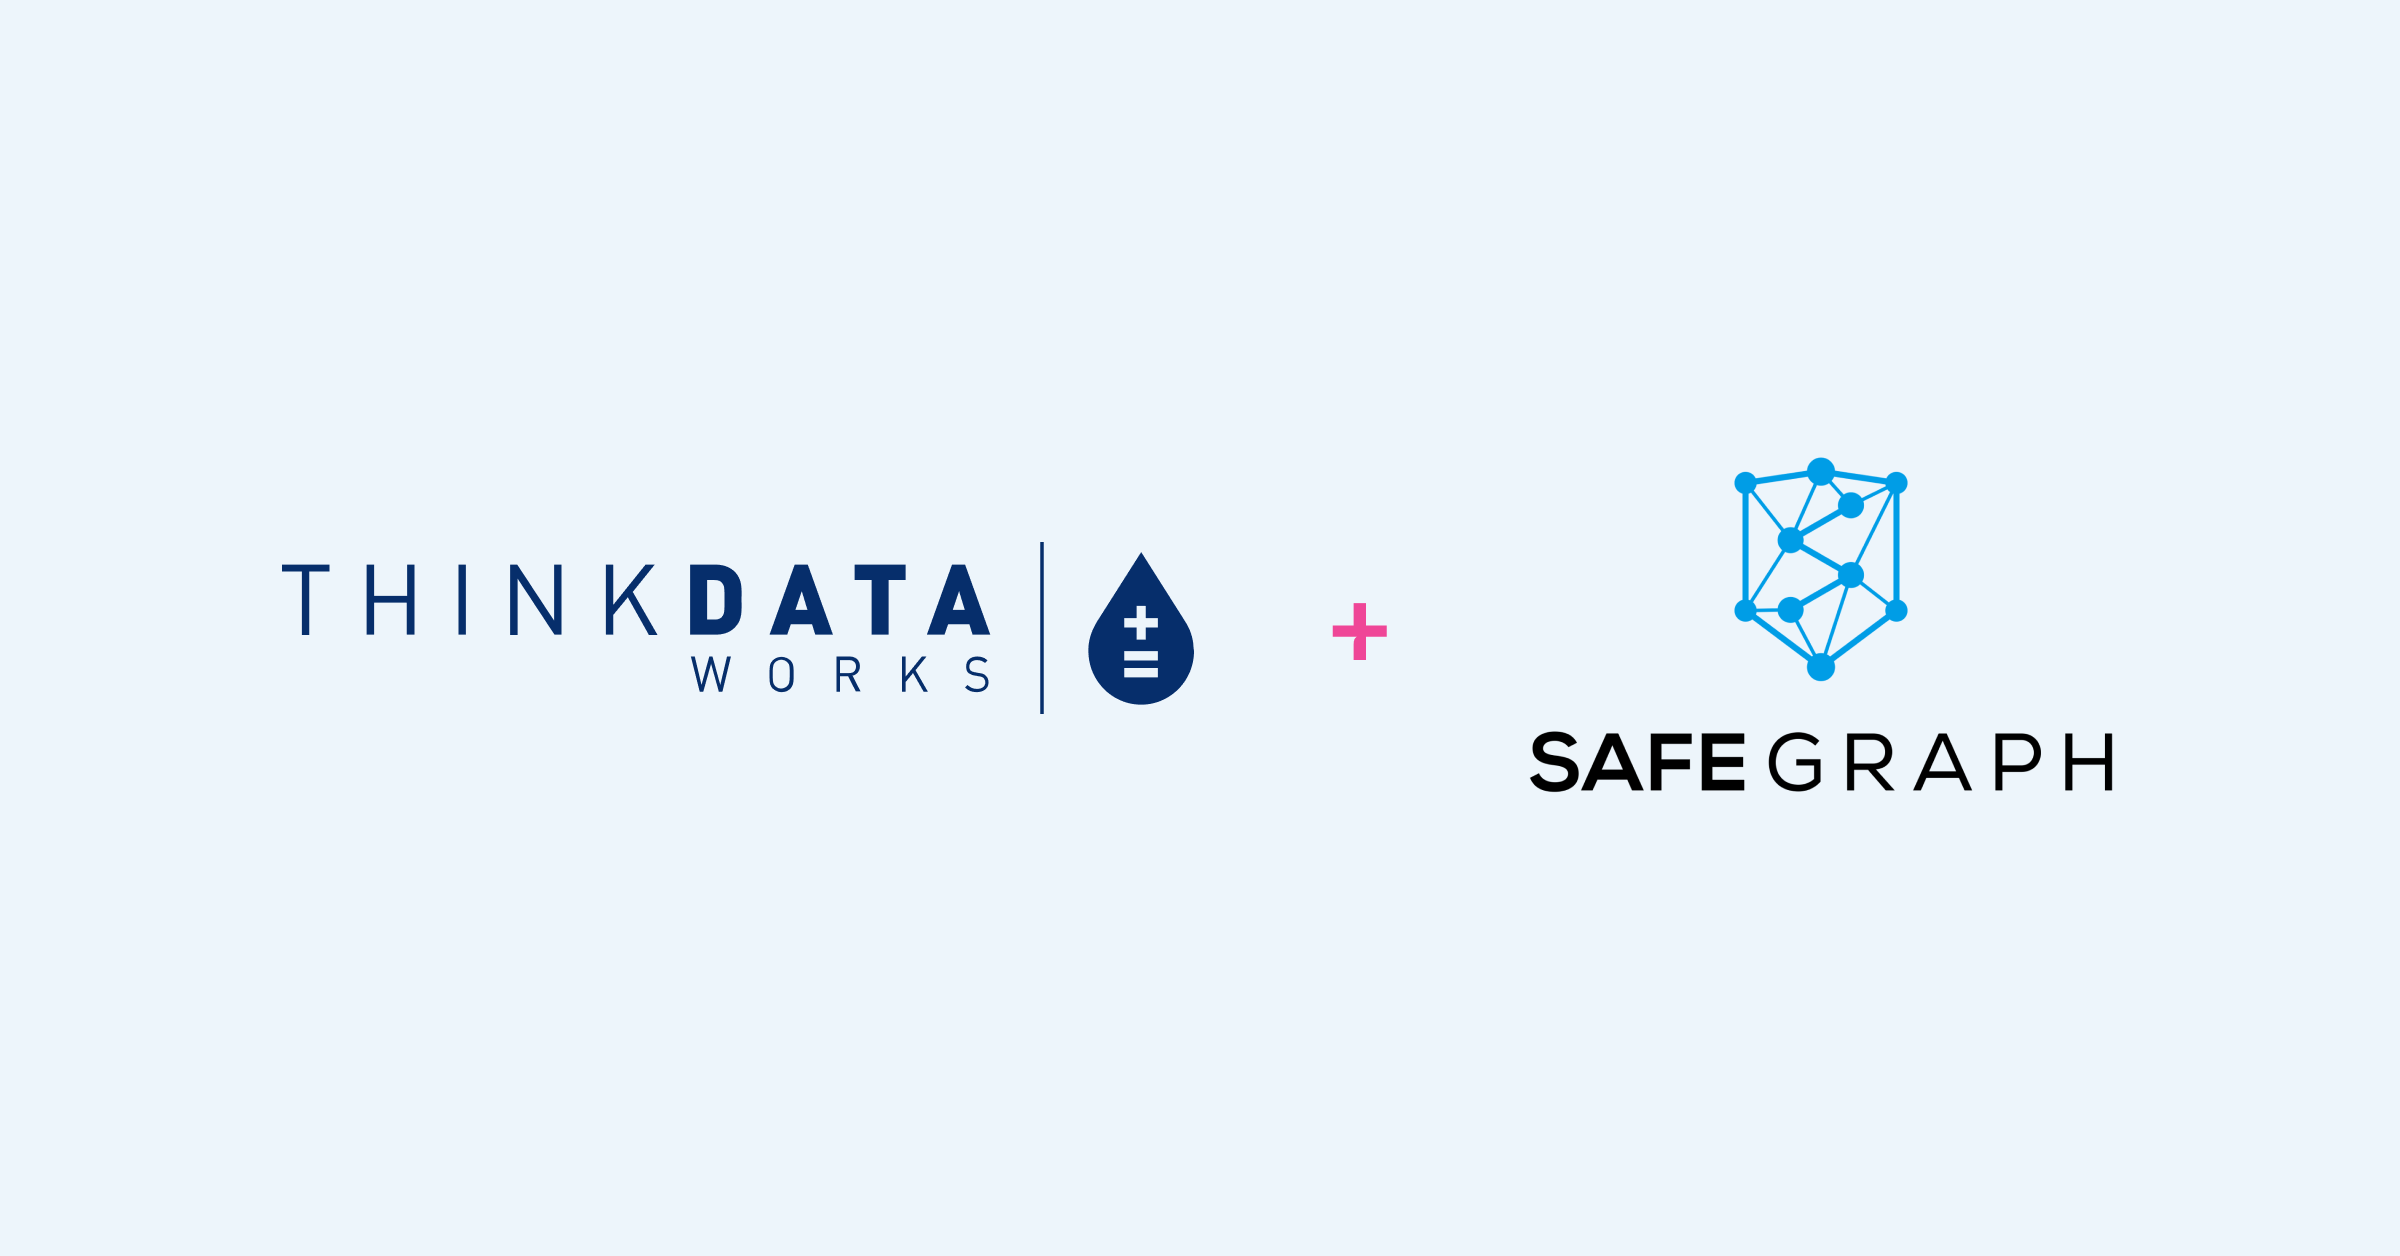 ThinkData Works partners with Safegraph